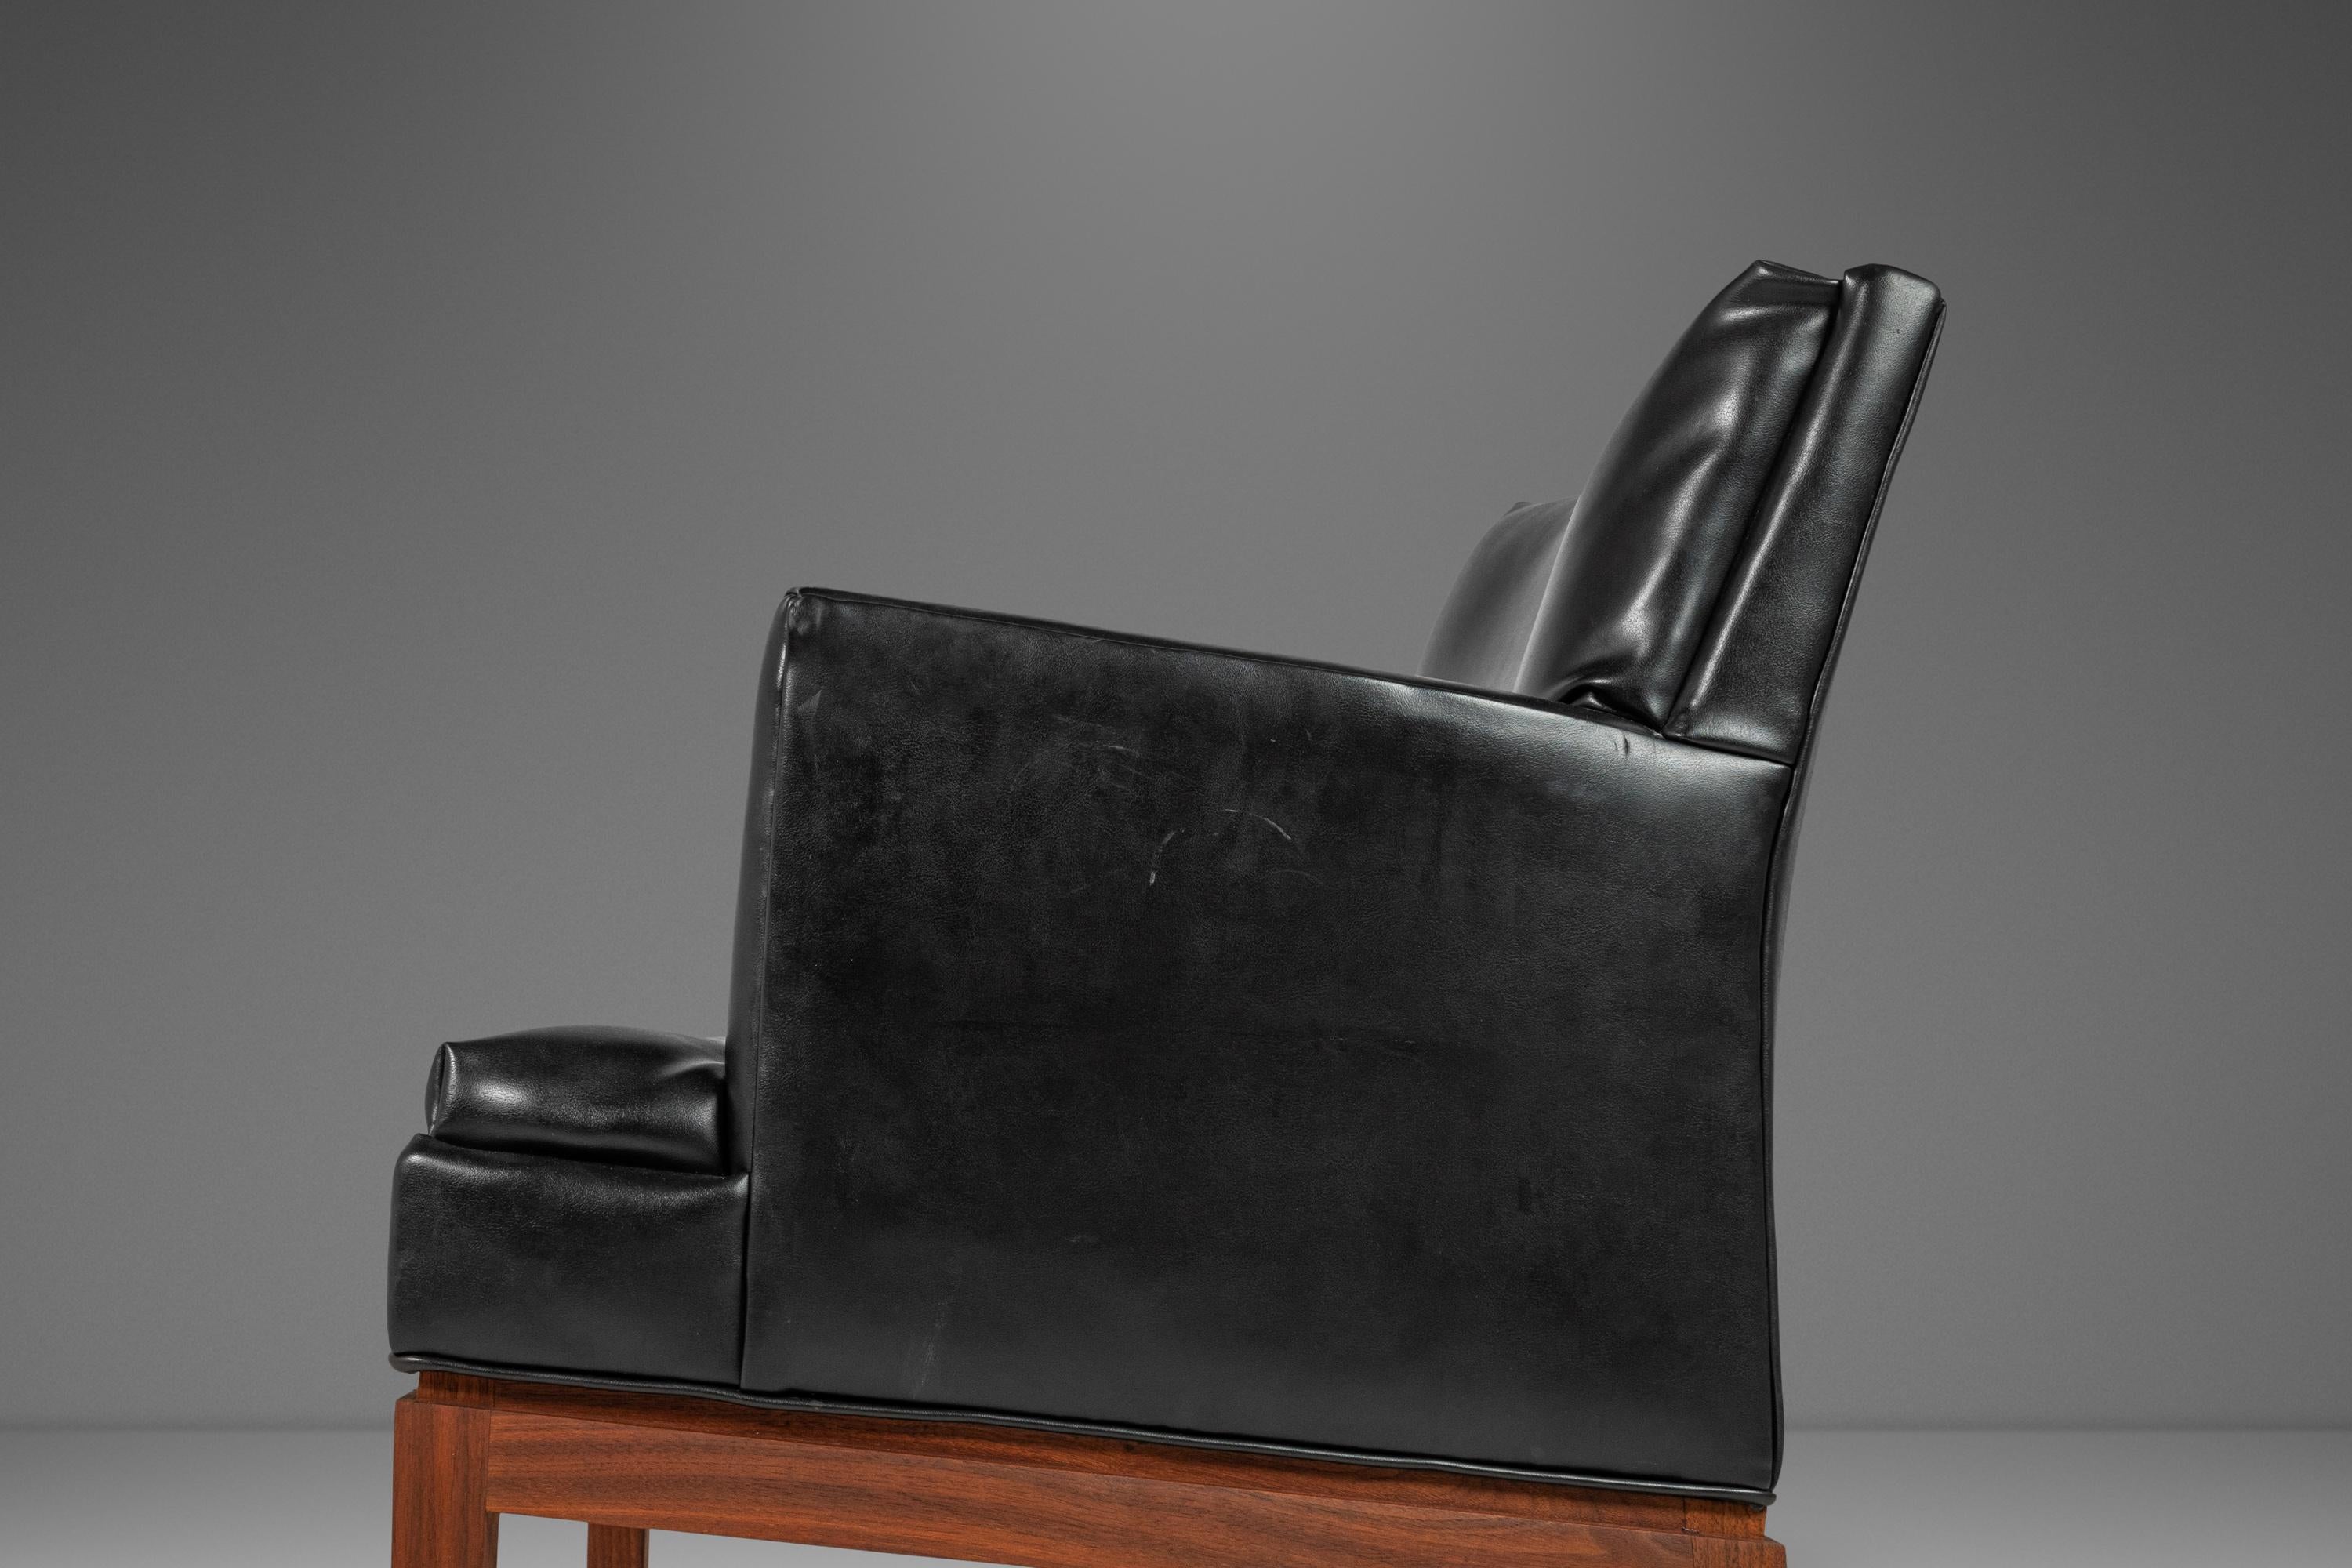 Set of 2 Lounge Chairs by Marble Imperial in Leatherette & Walnut, USA, c. 1960s For Sale 4